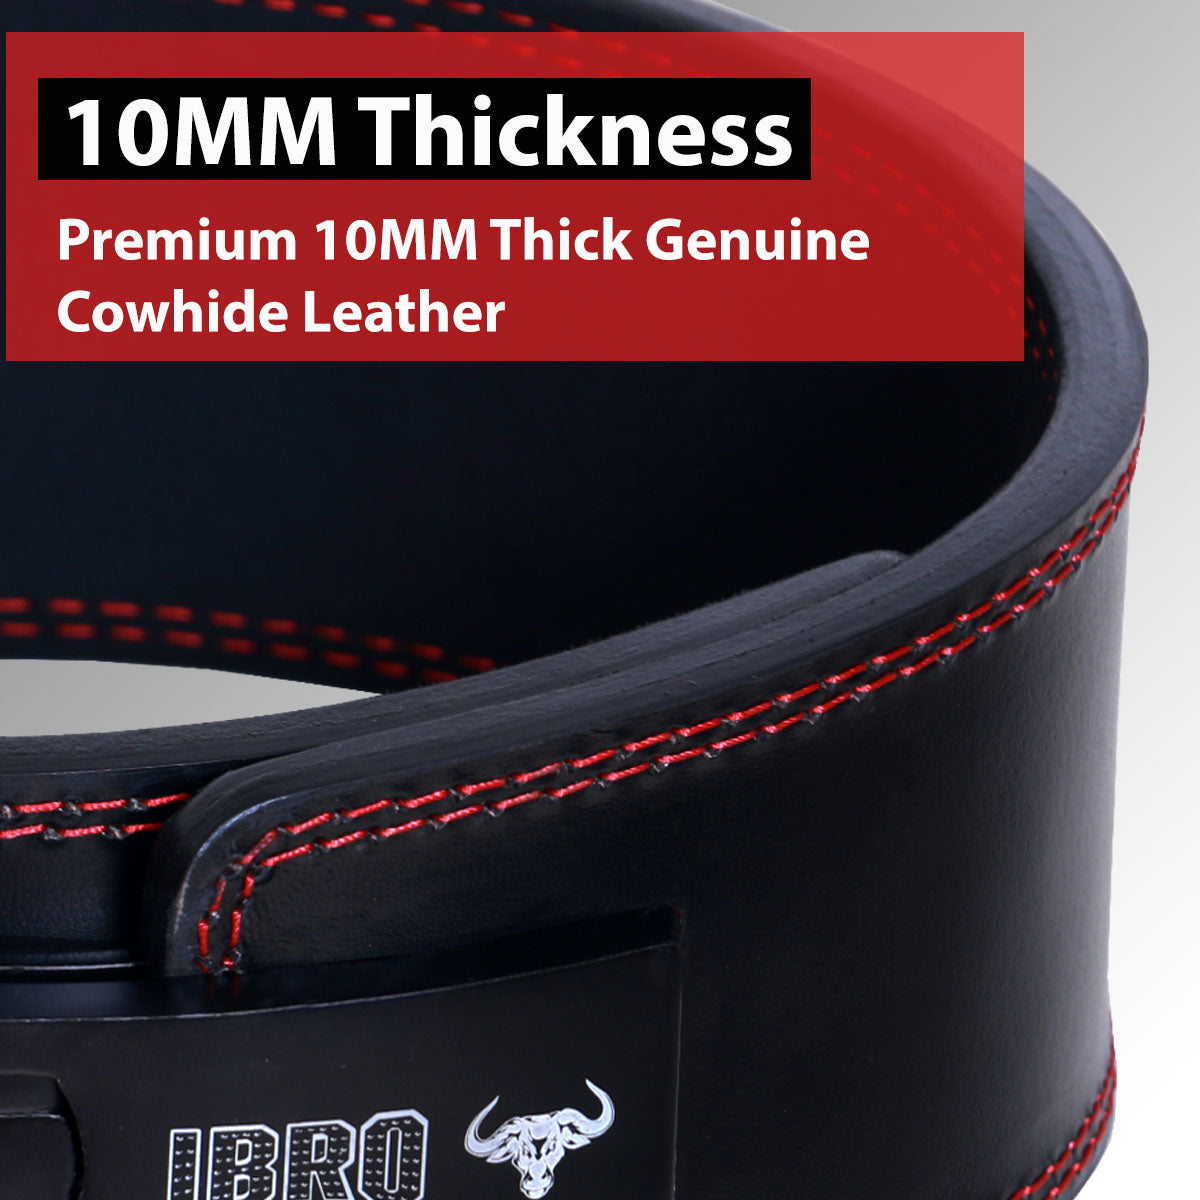 IBRO Powerlifting Weight Lifting Lever Gym Belt – 10MM Extreme Power Heavy Duty 100% Genuine Leather- Squat Deadlift Bodybuilding WeightLifting IPF Strongman for Men Women 10mm BlackRed